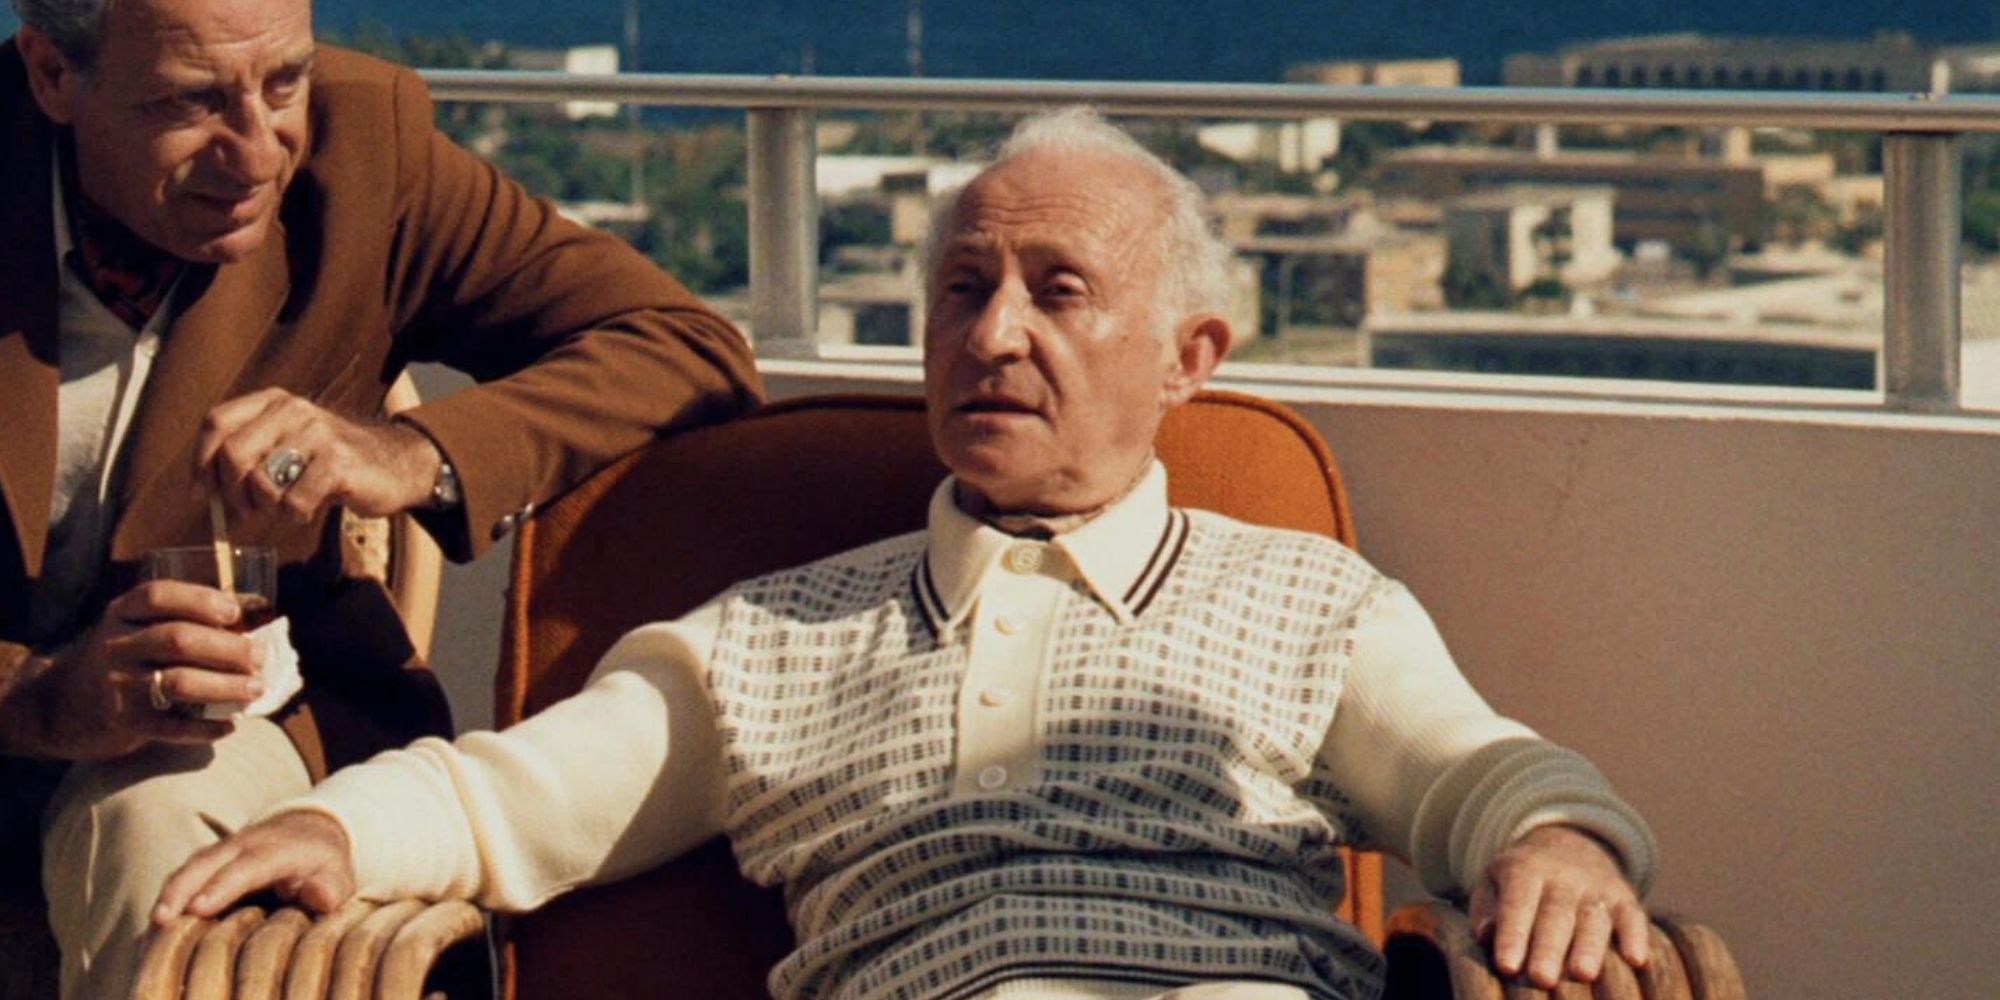 Lee Strasberg sitting in a chair in The Godfather: Part II (1974)